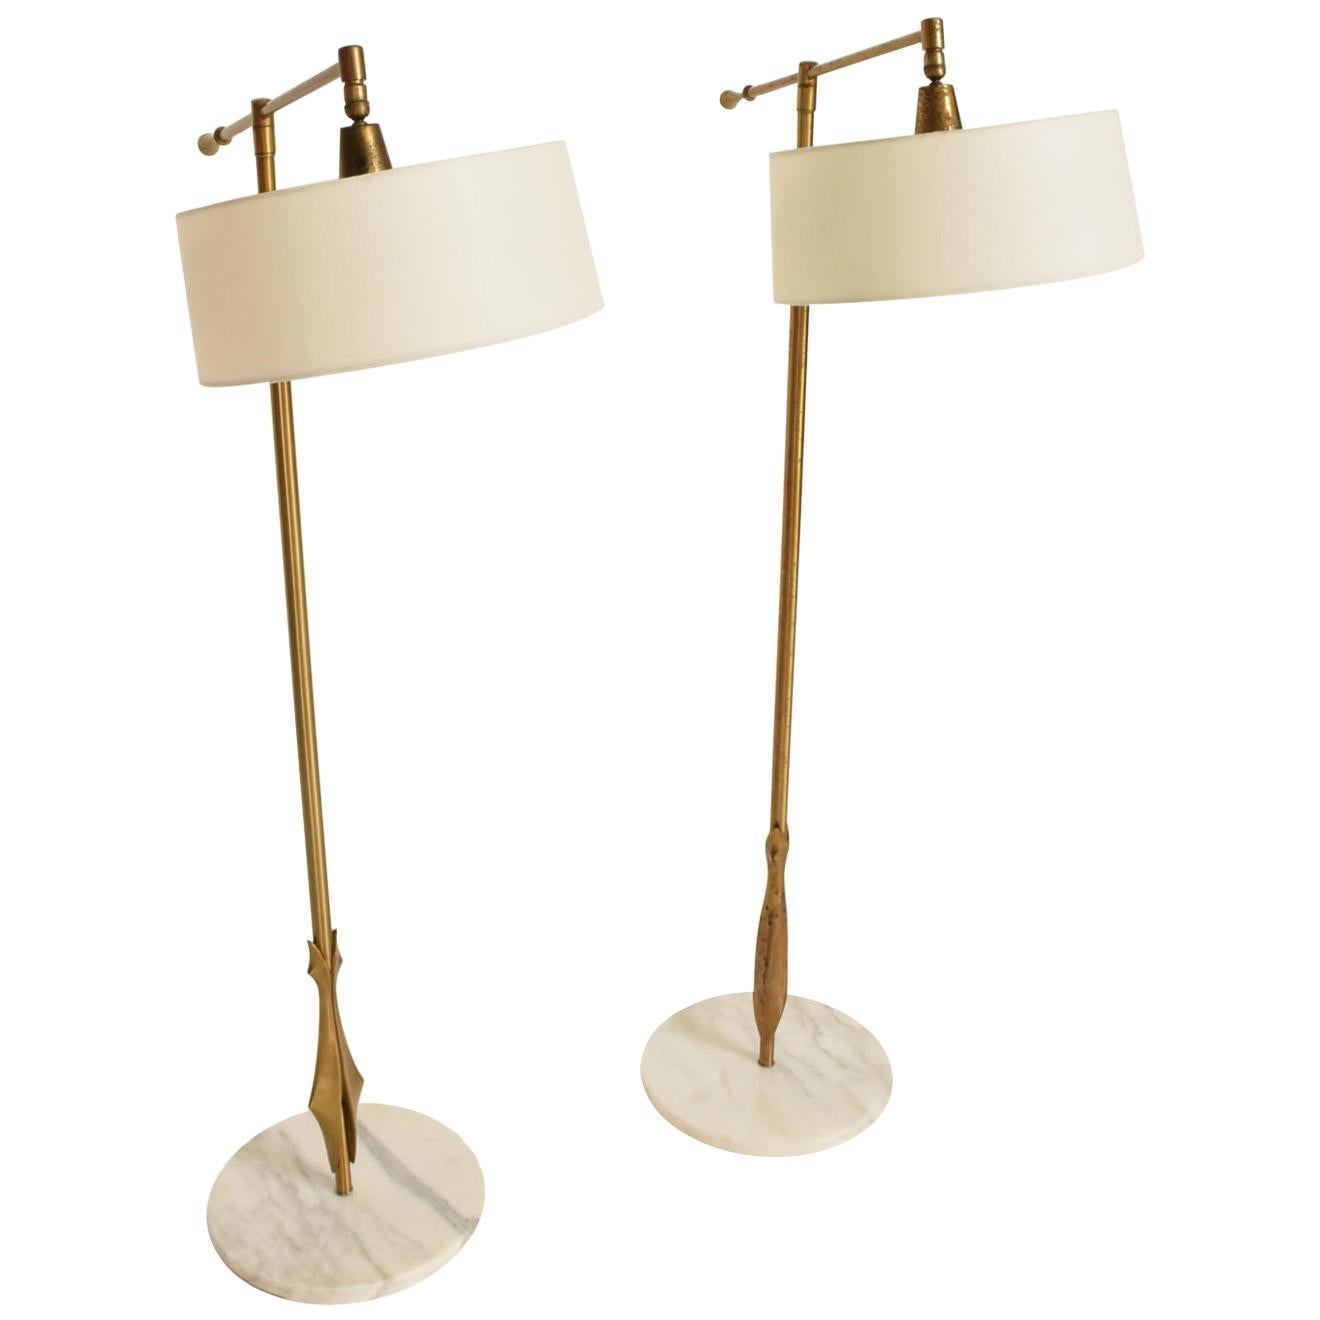 Rare Pair of Floor Lamps by Gerald Thurston with Original Shade and Marble Base